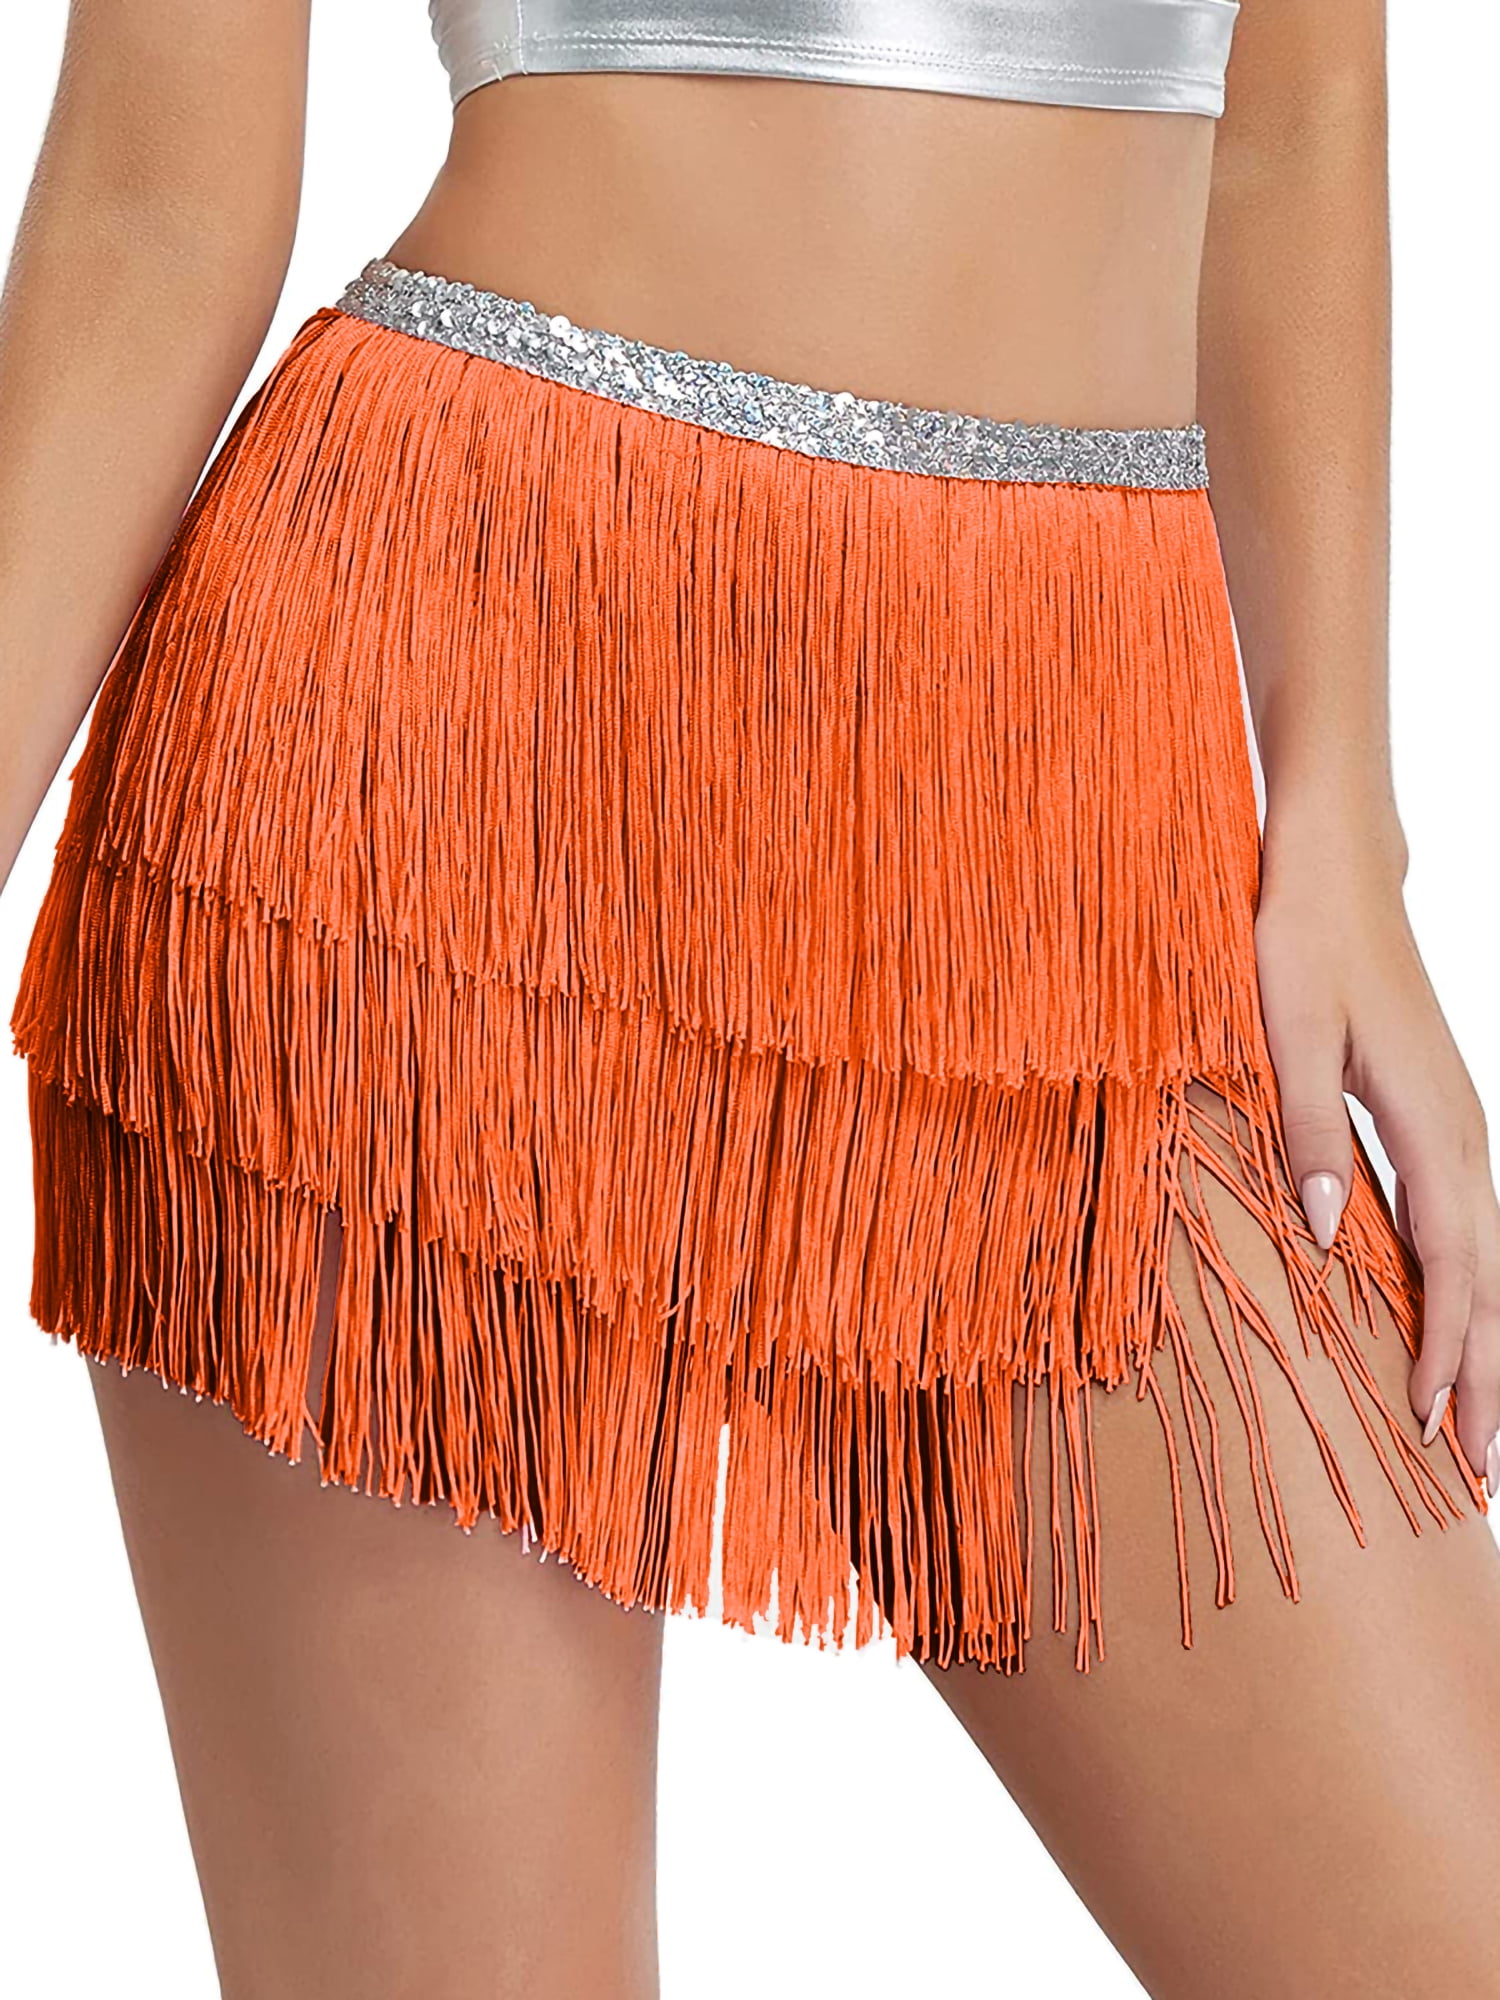 Silver Mesh Sequins Fringed Women Long Sleeves Top Hip Scarf Skirt Safety Shorts 